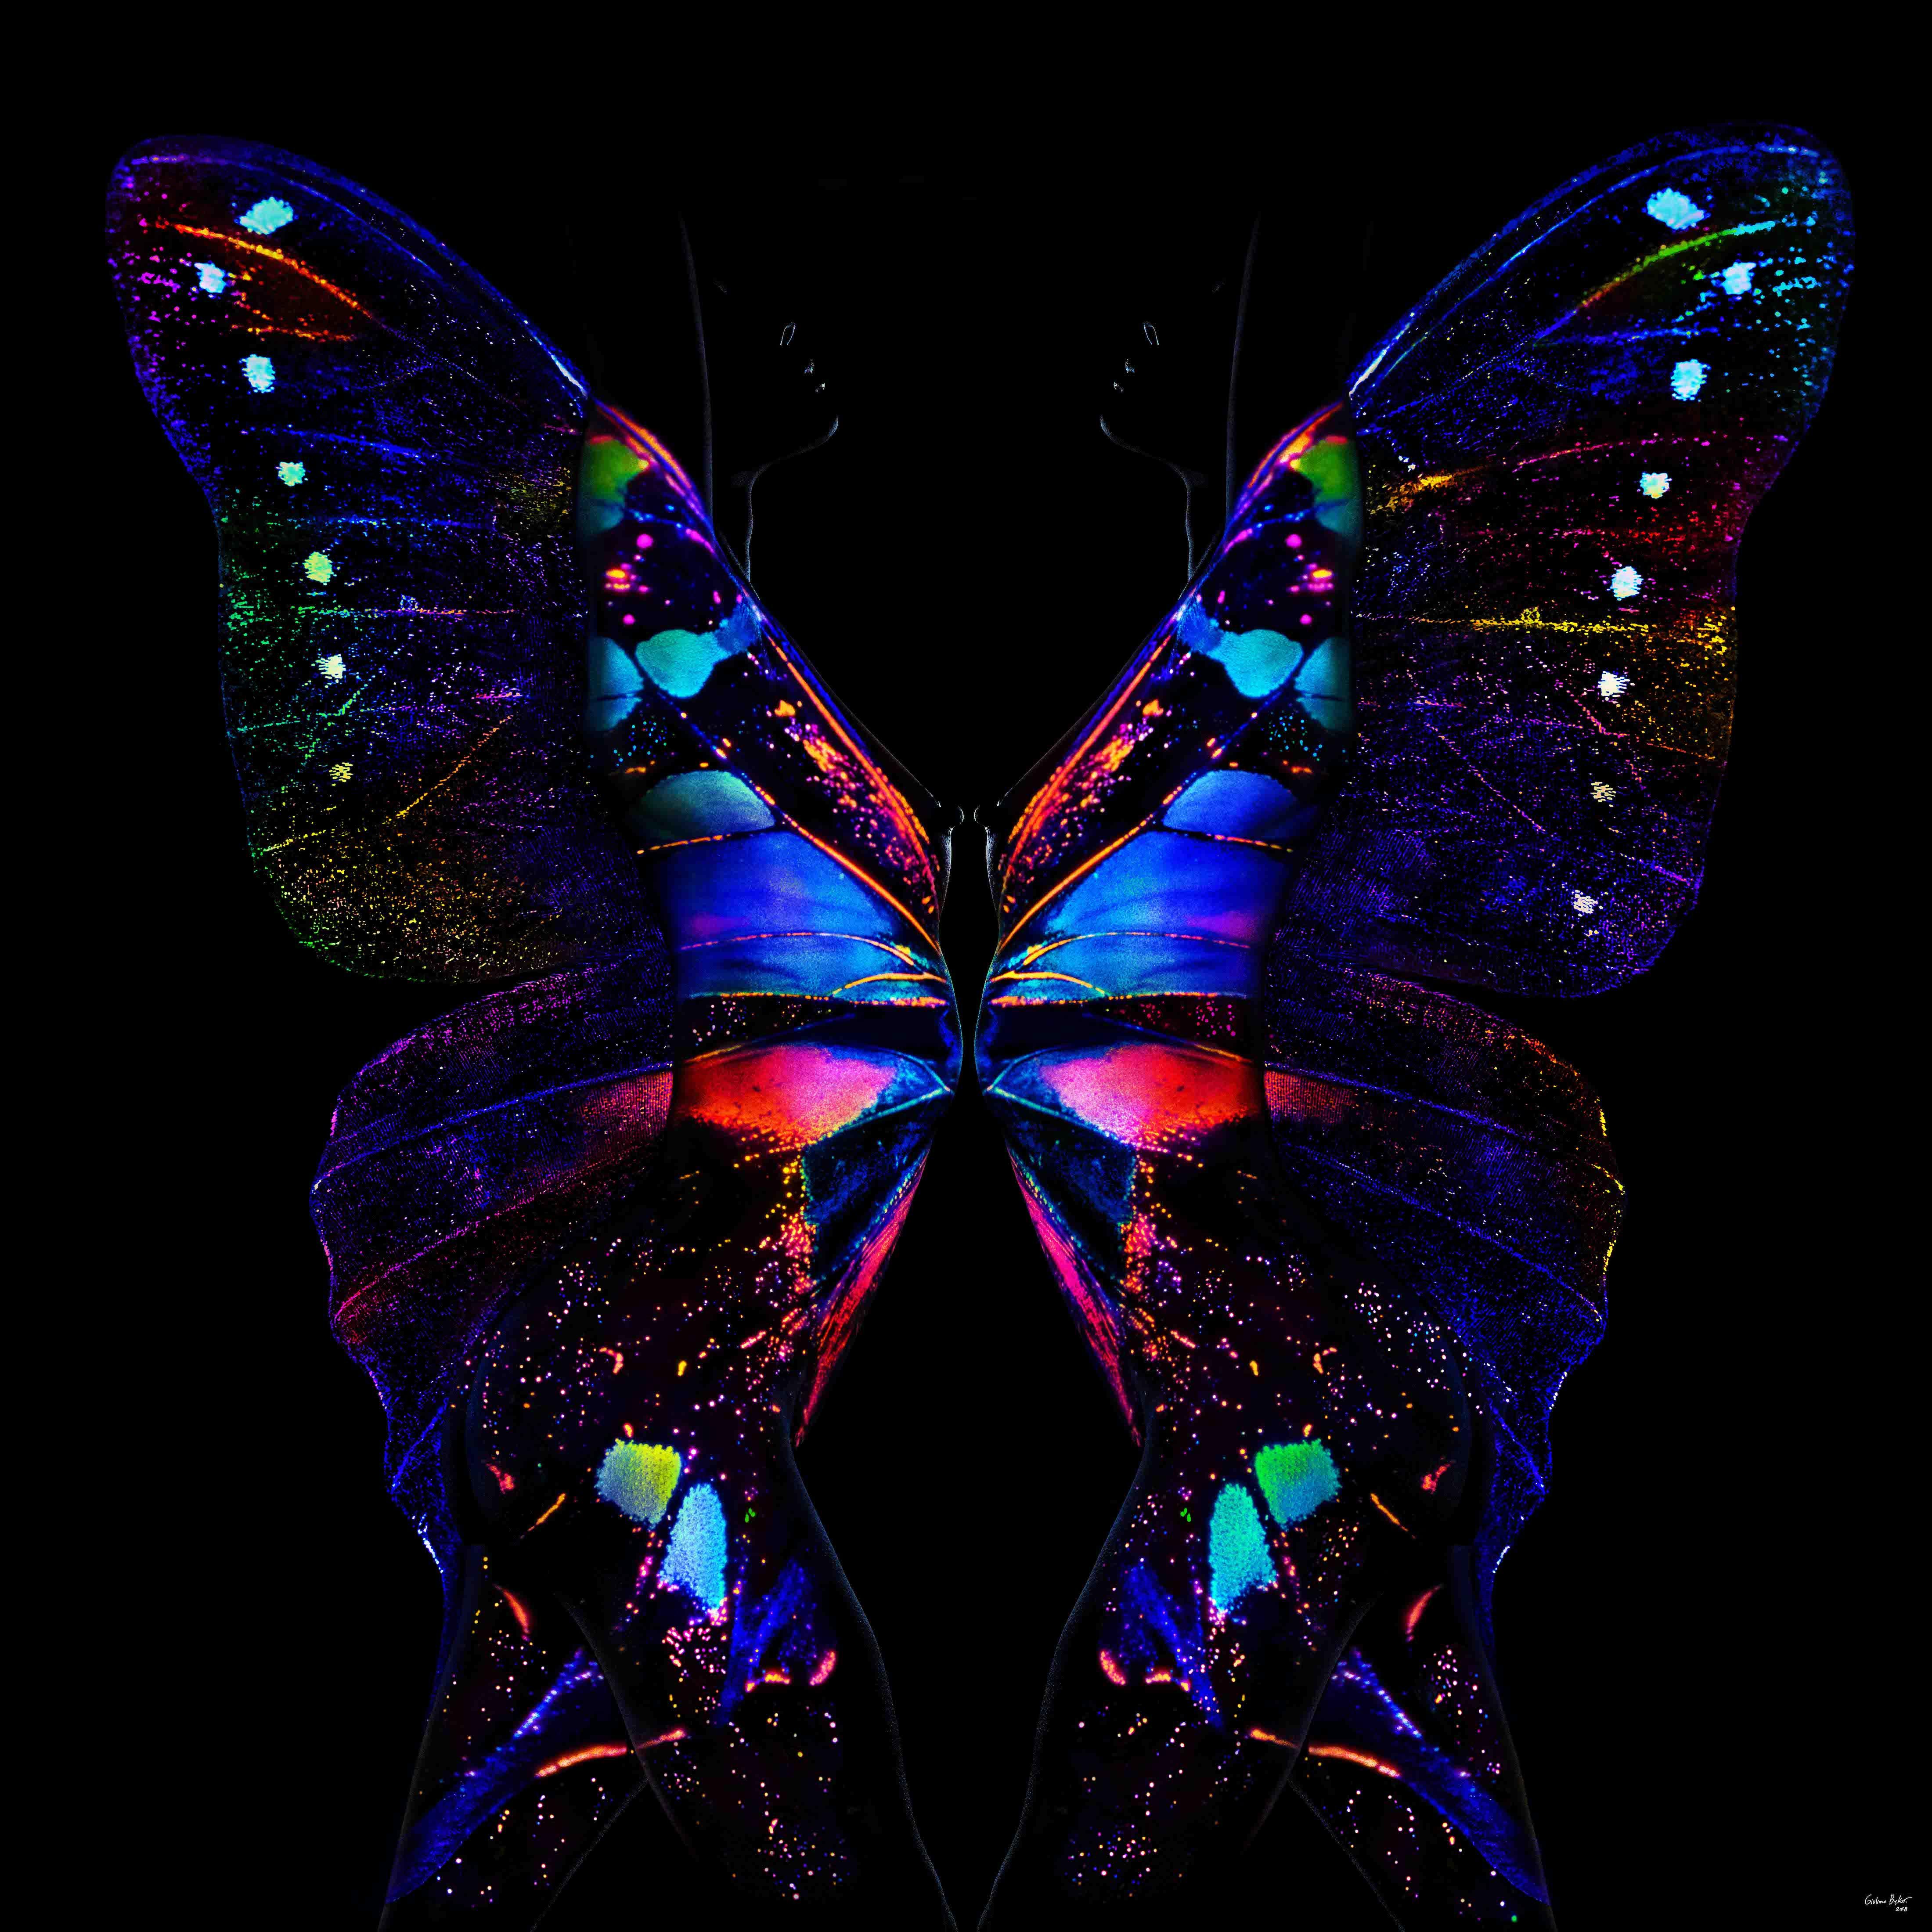 "Butterfly 24" LED Photography (FRAMED) 40" x 40" inch Ed. 2/8 by Giuliano Bekor

Title - B24
Edition 2 OF 8 
Year created 2018
Print size 40 x 40 Inches Trim Bleed 
Artwork finish size 42 x 42 Inches 

Medium:  
This artwork is printed on the